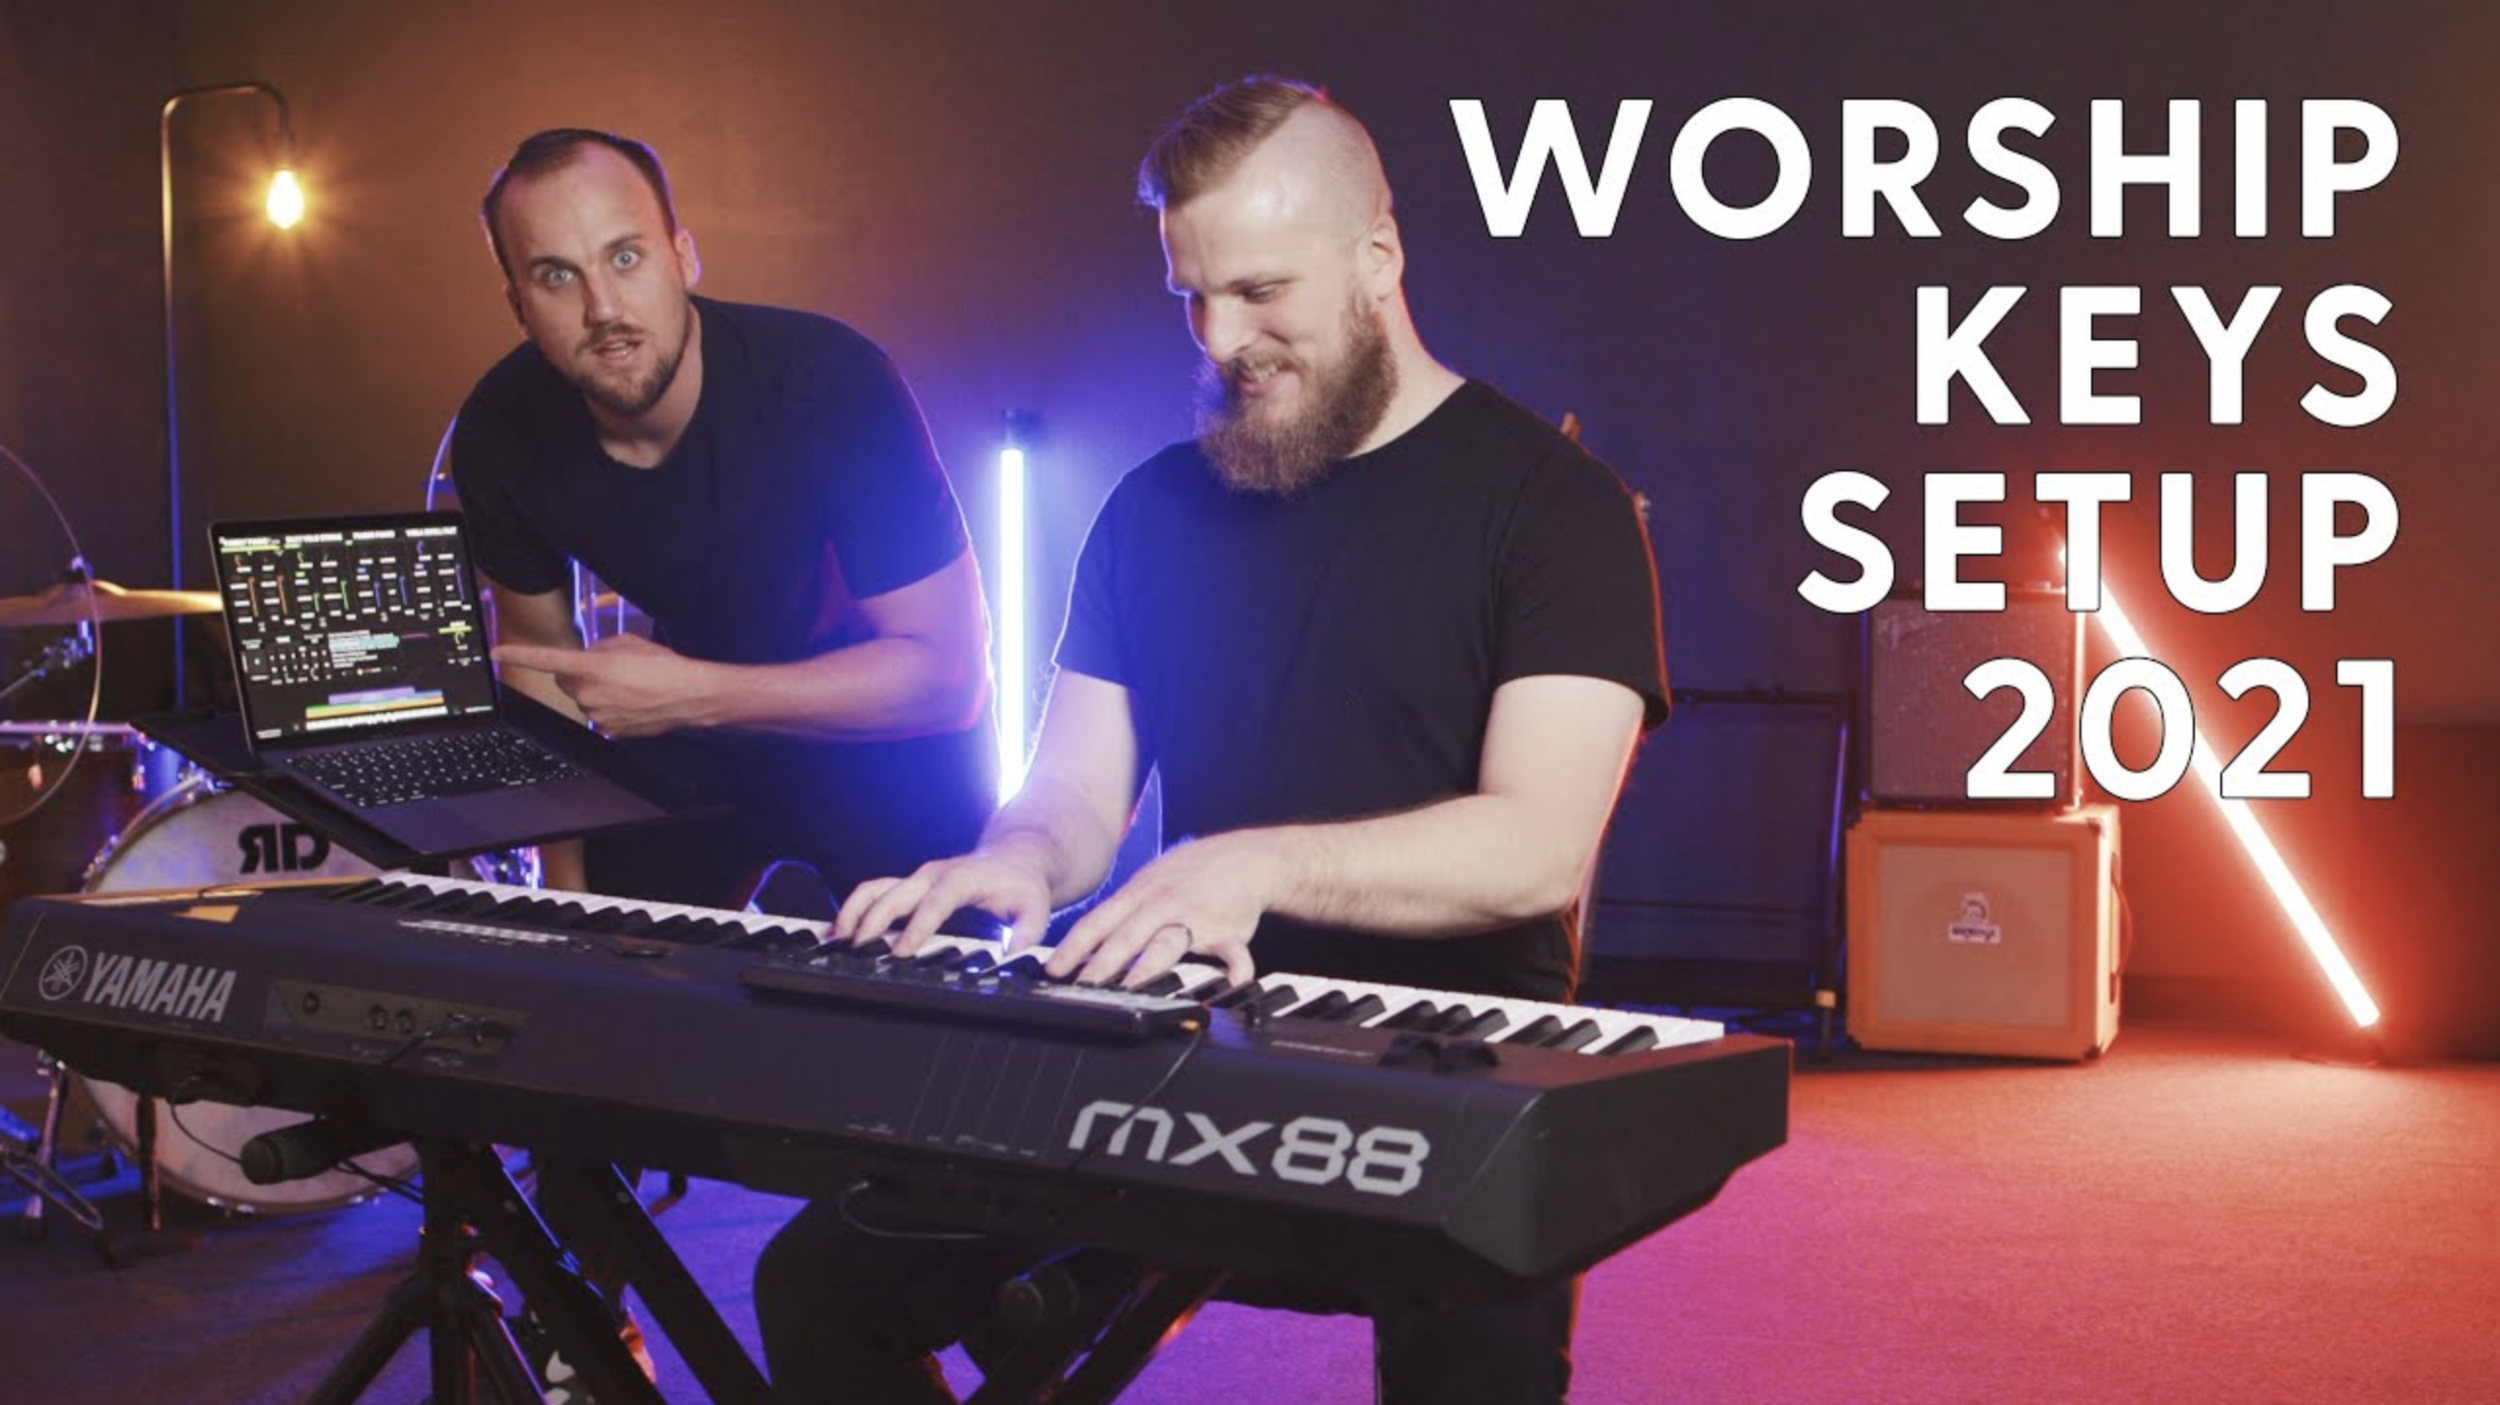 The Ultimate Guide to Worship Keys 2021 w/Churchfront